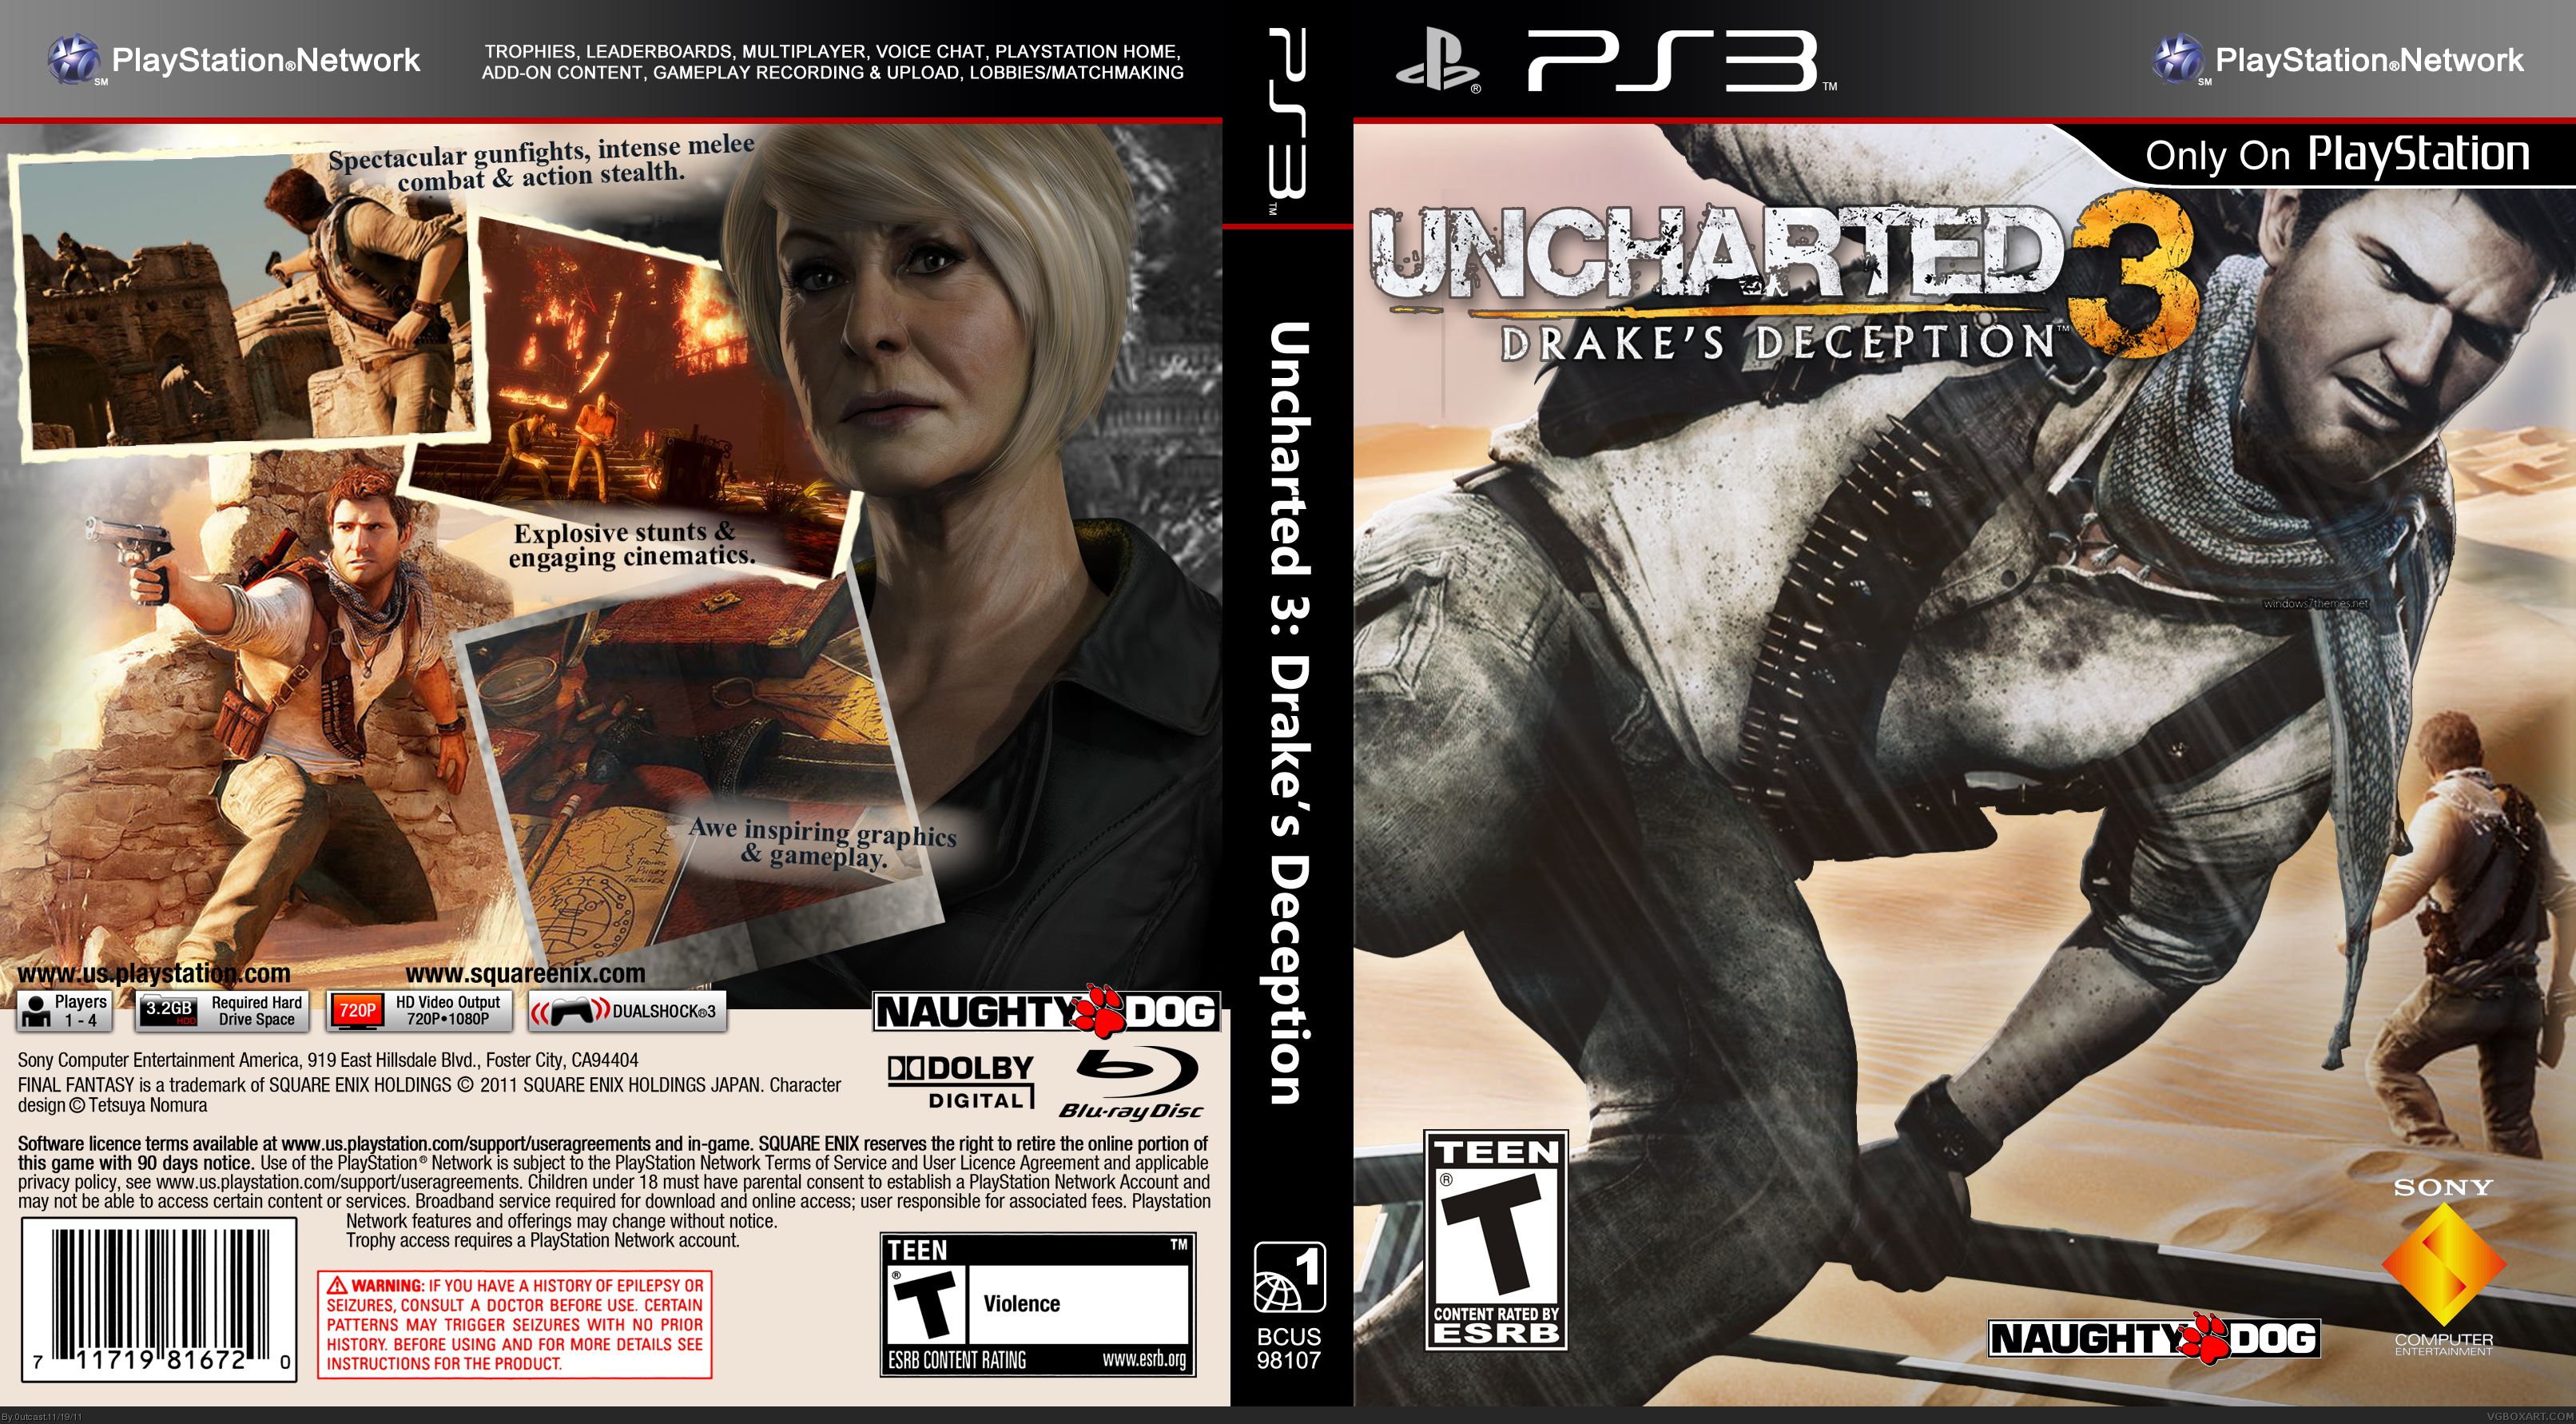 Uncharted: Drake's Fortune PlayStation 3 Box Art Cover by dmshaposv